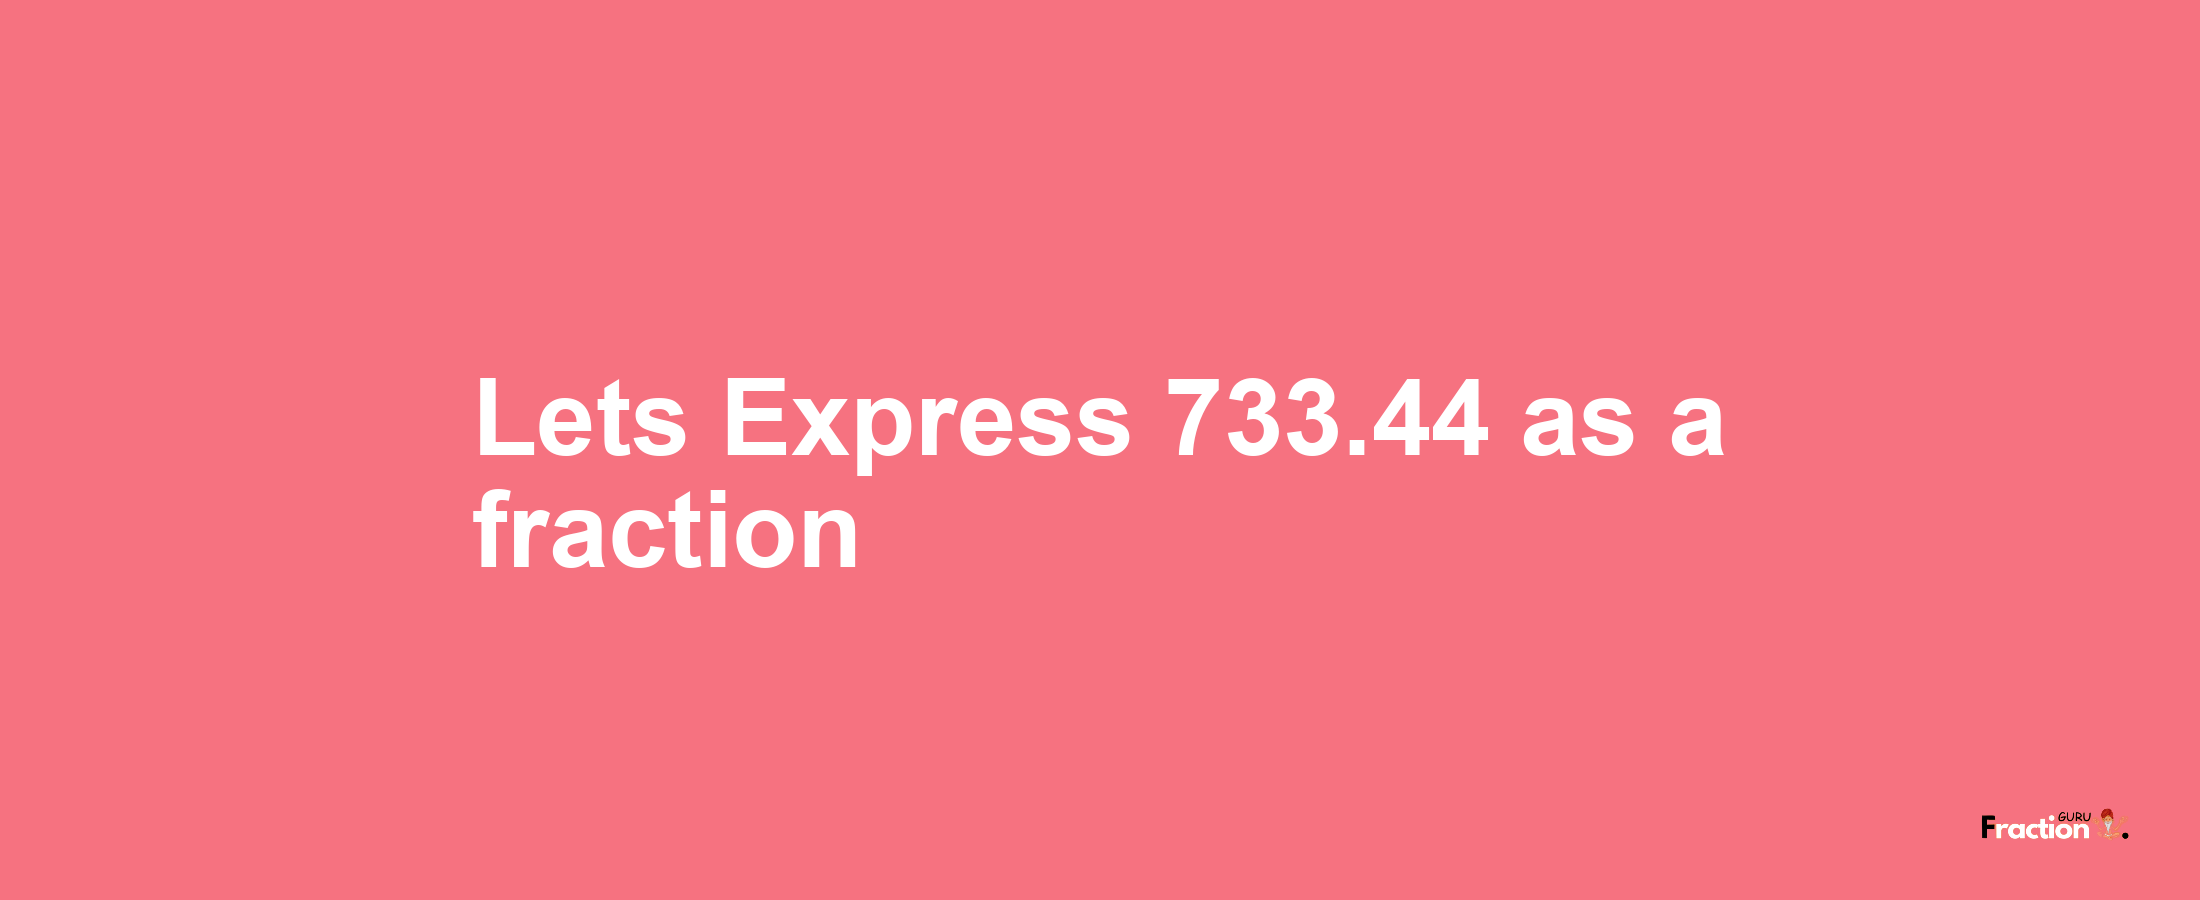 Lets Express 733.44 as afraction